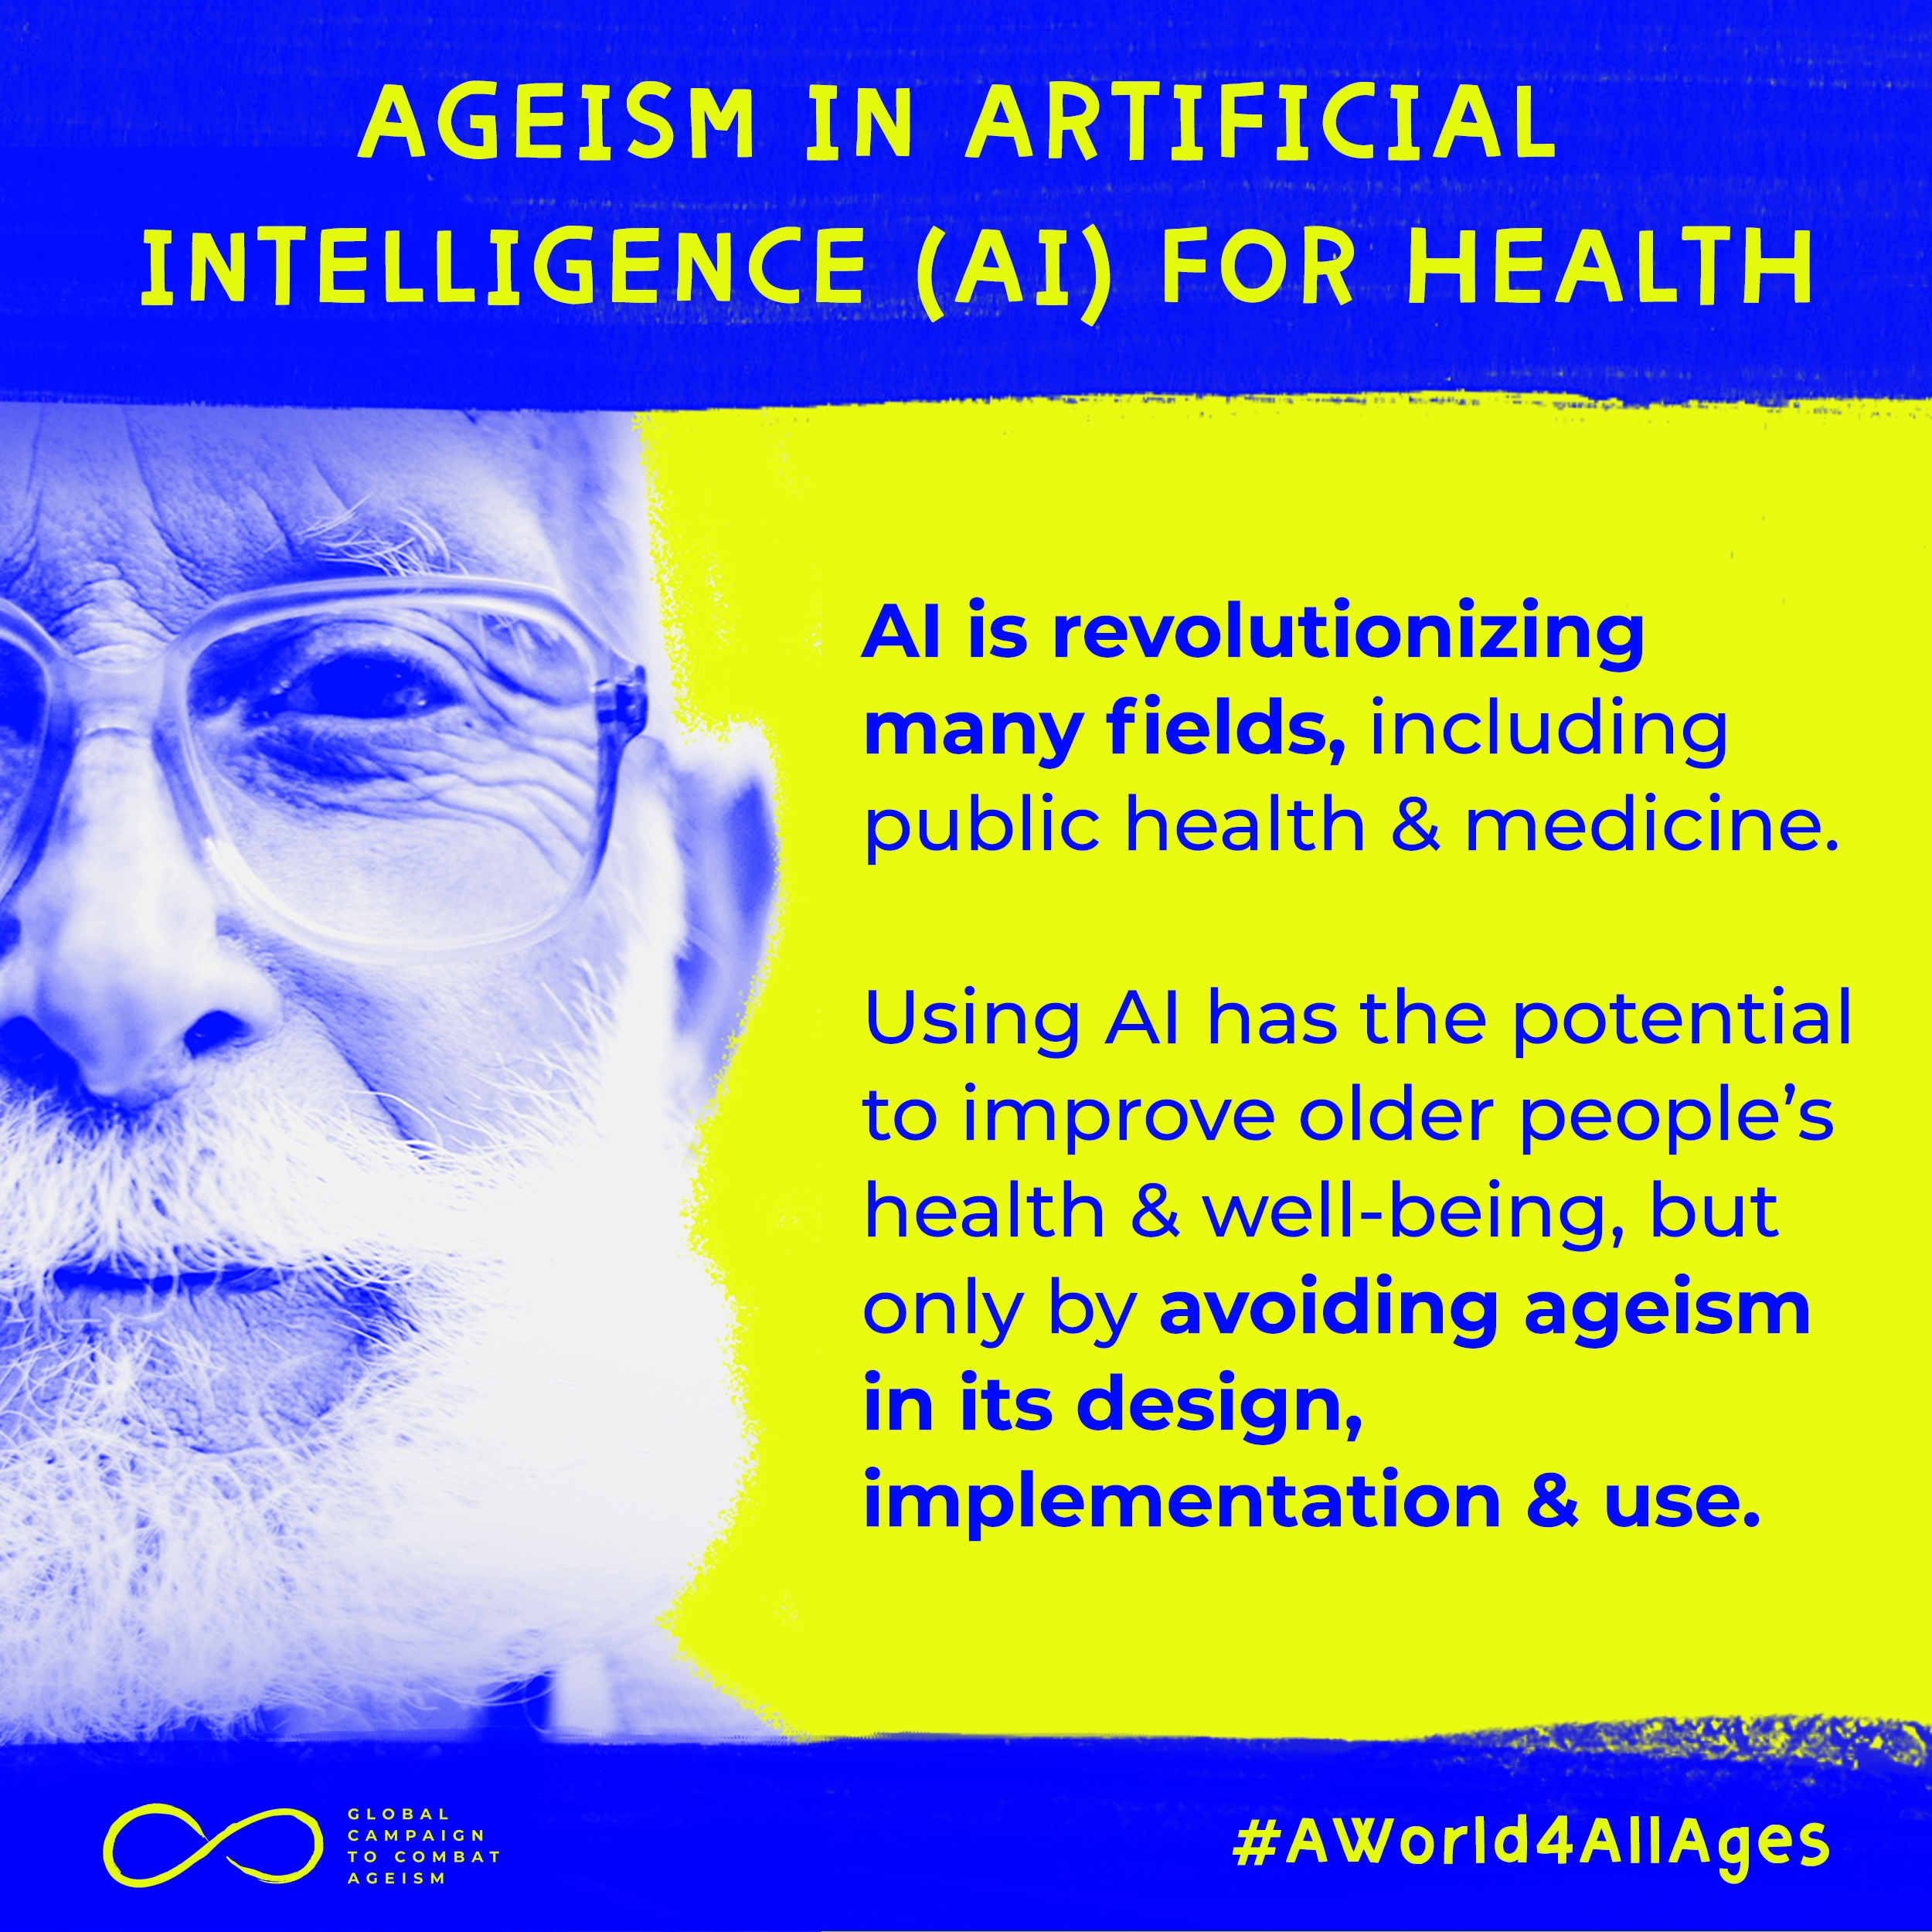 AI is revolutionizing many fields, including public health & medicine. Using AI has the potential to improve older people's well-being, but only by avoiding ageism in its design, implementation & use.